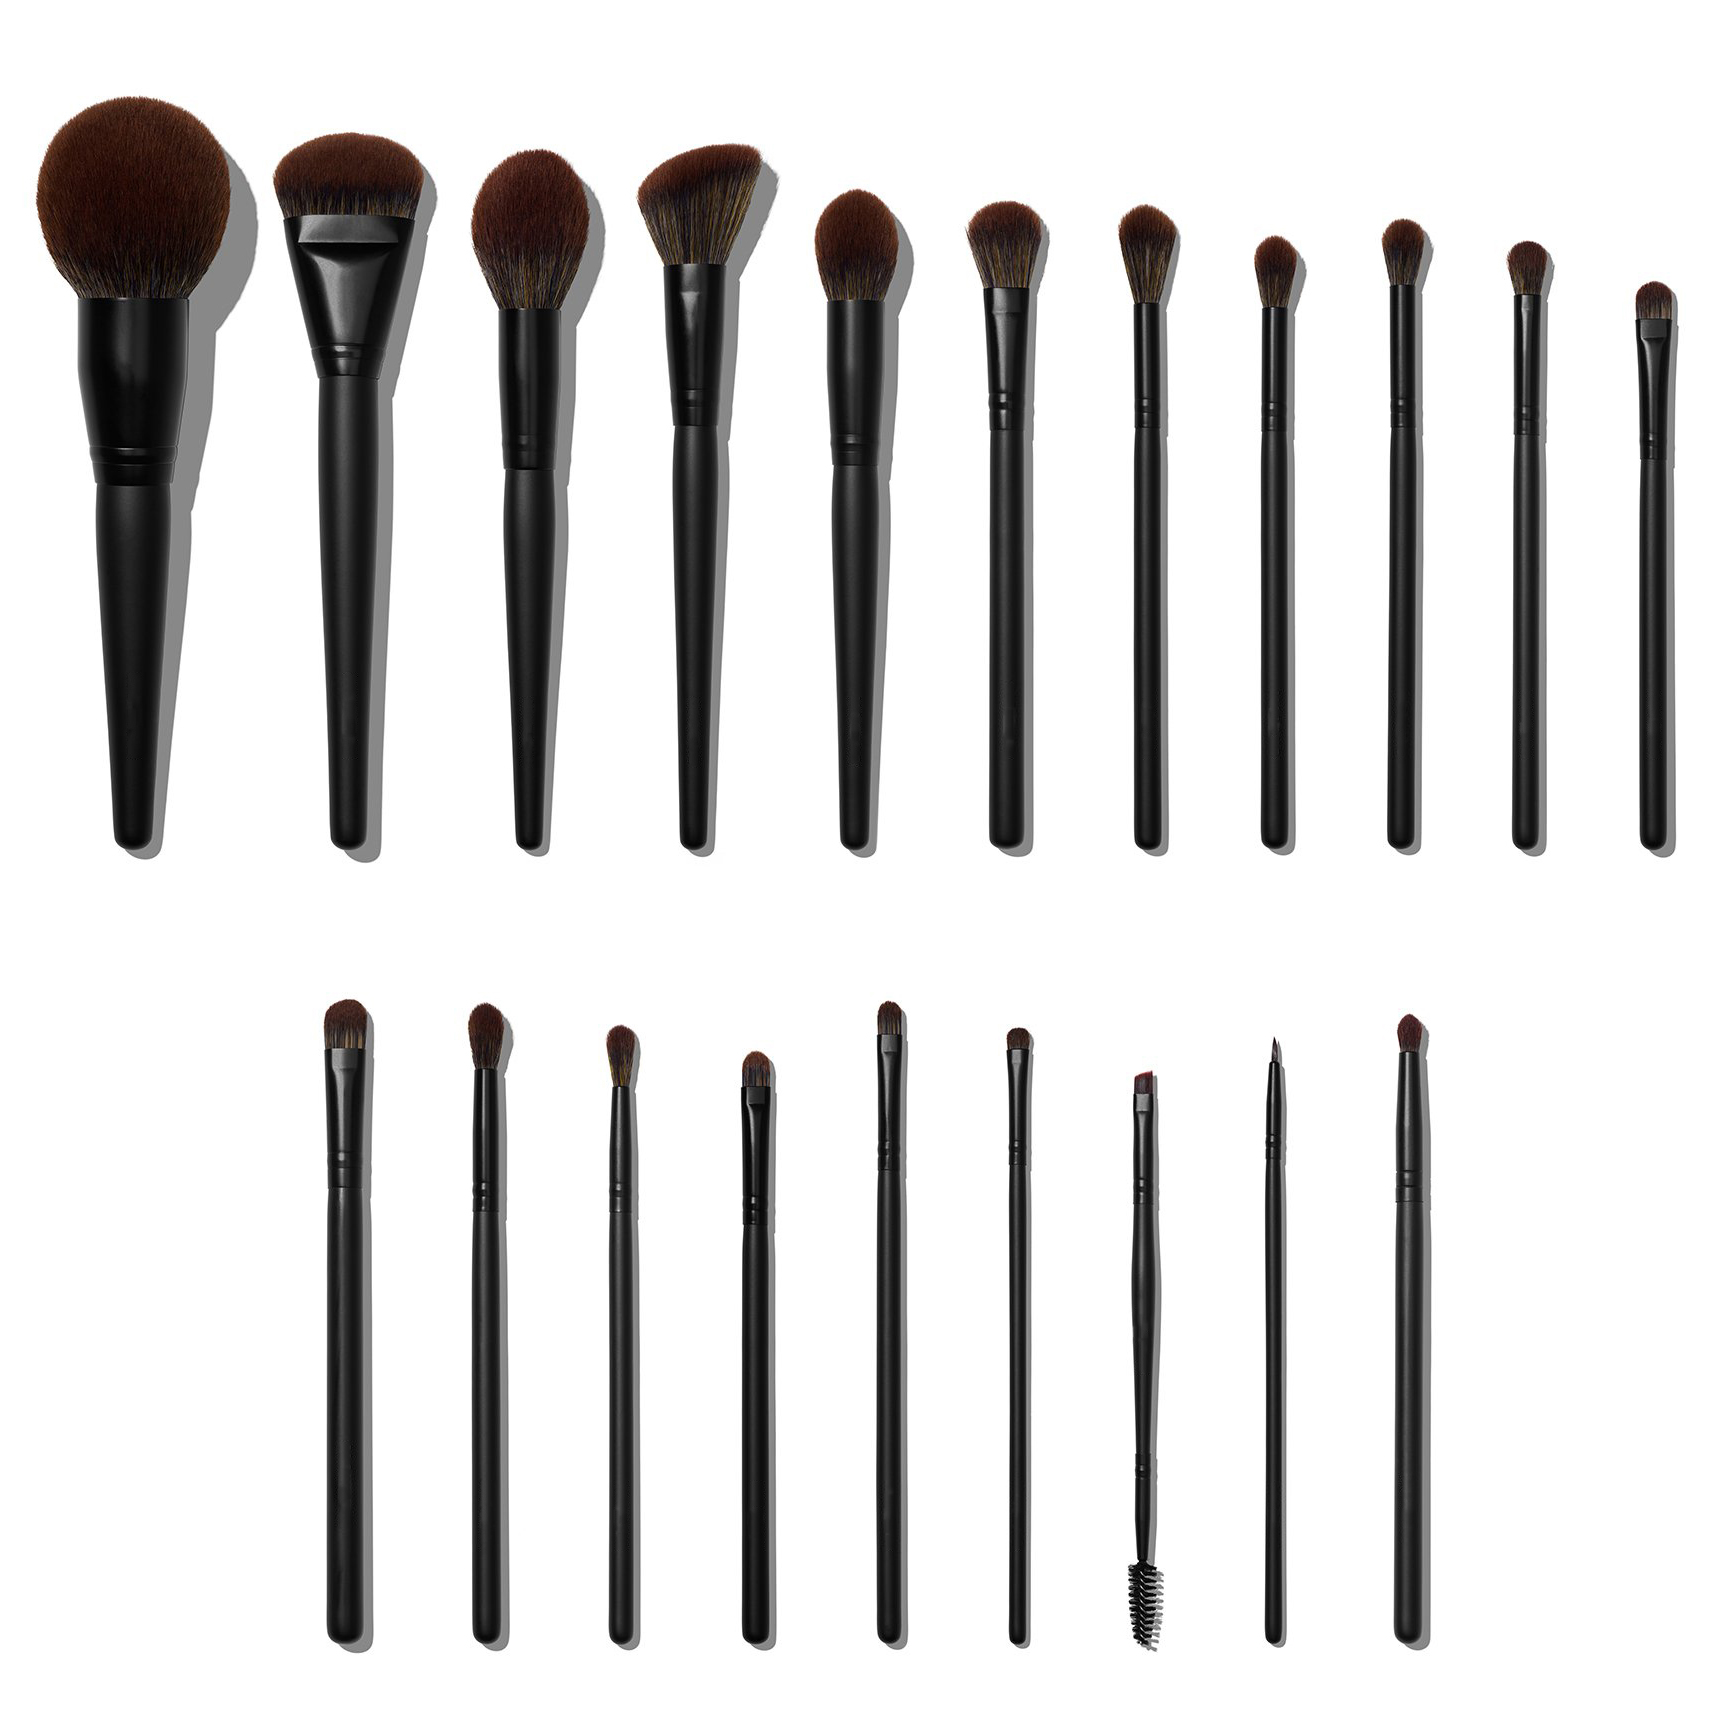 Makeup brushes and their function